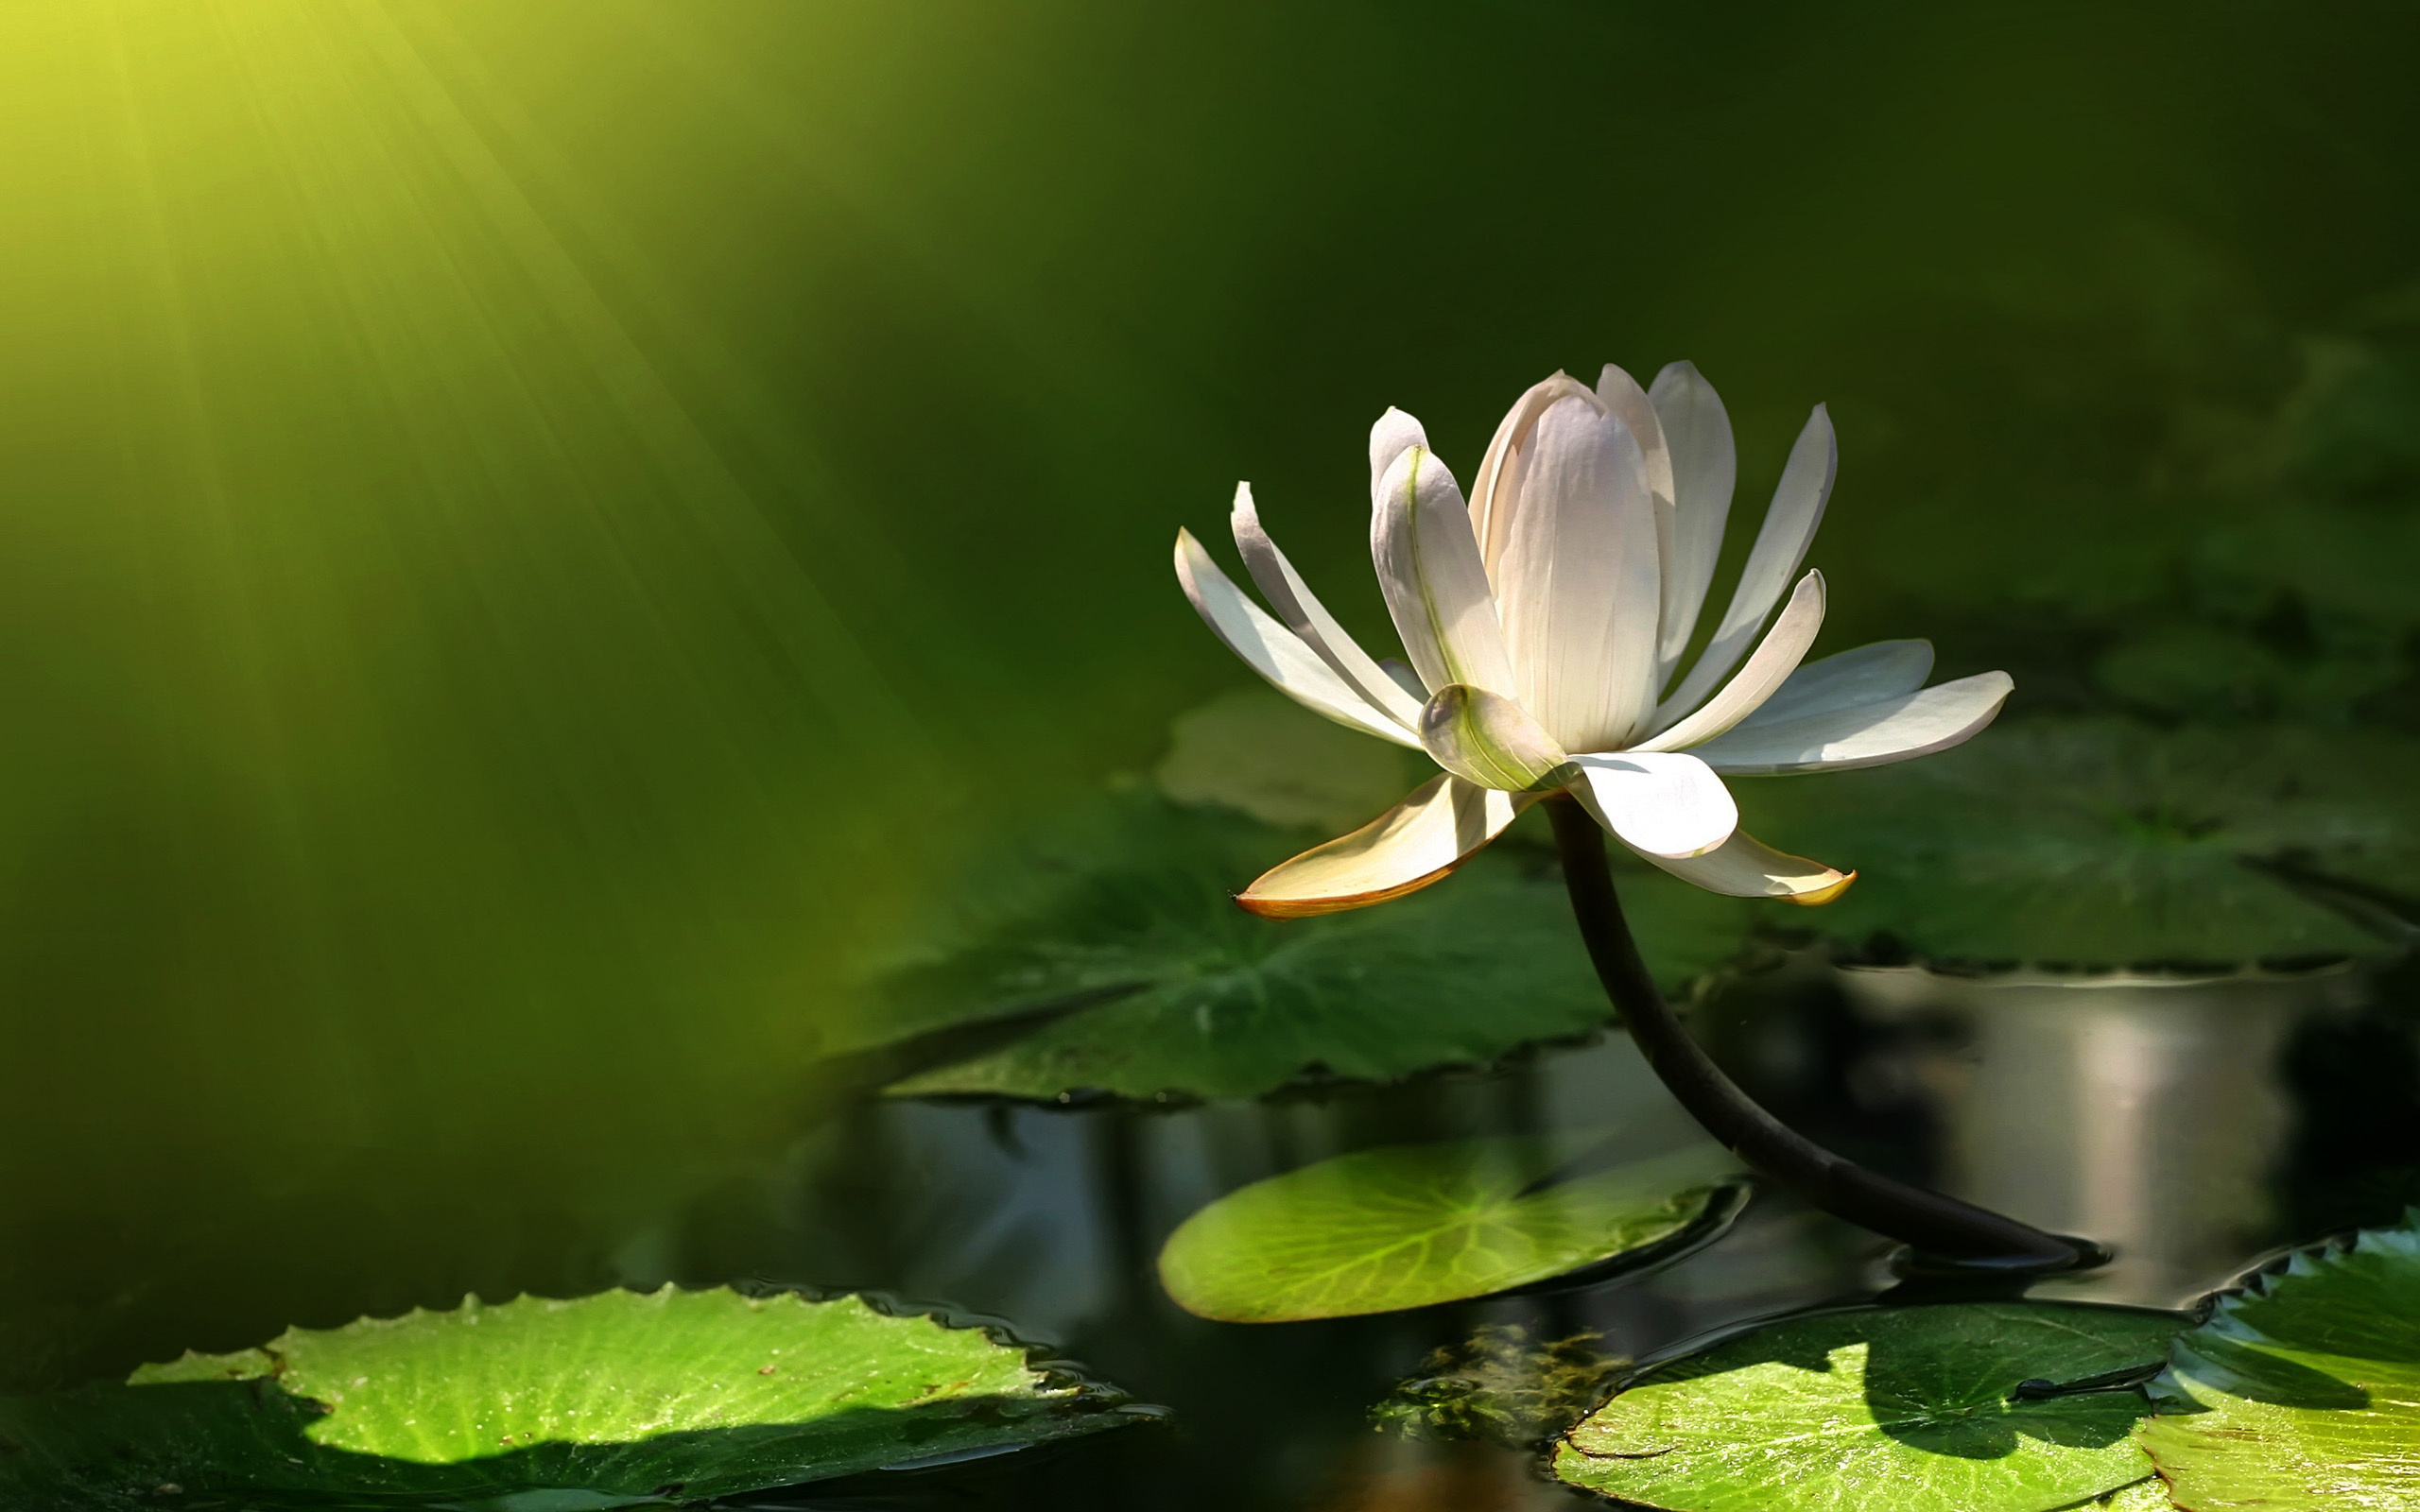 flowers, water lily, earth, flower